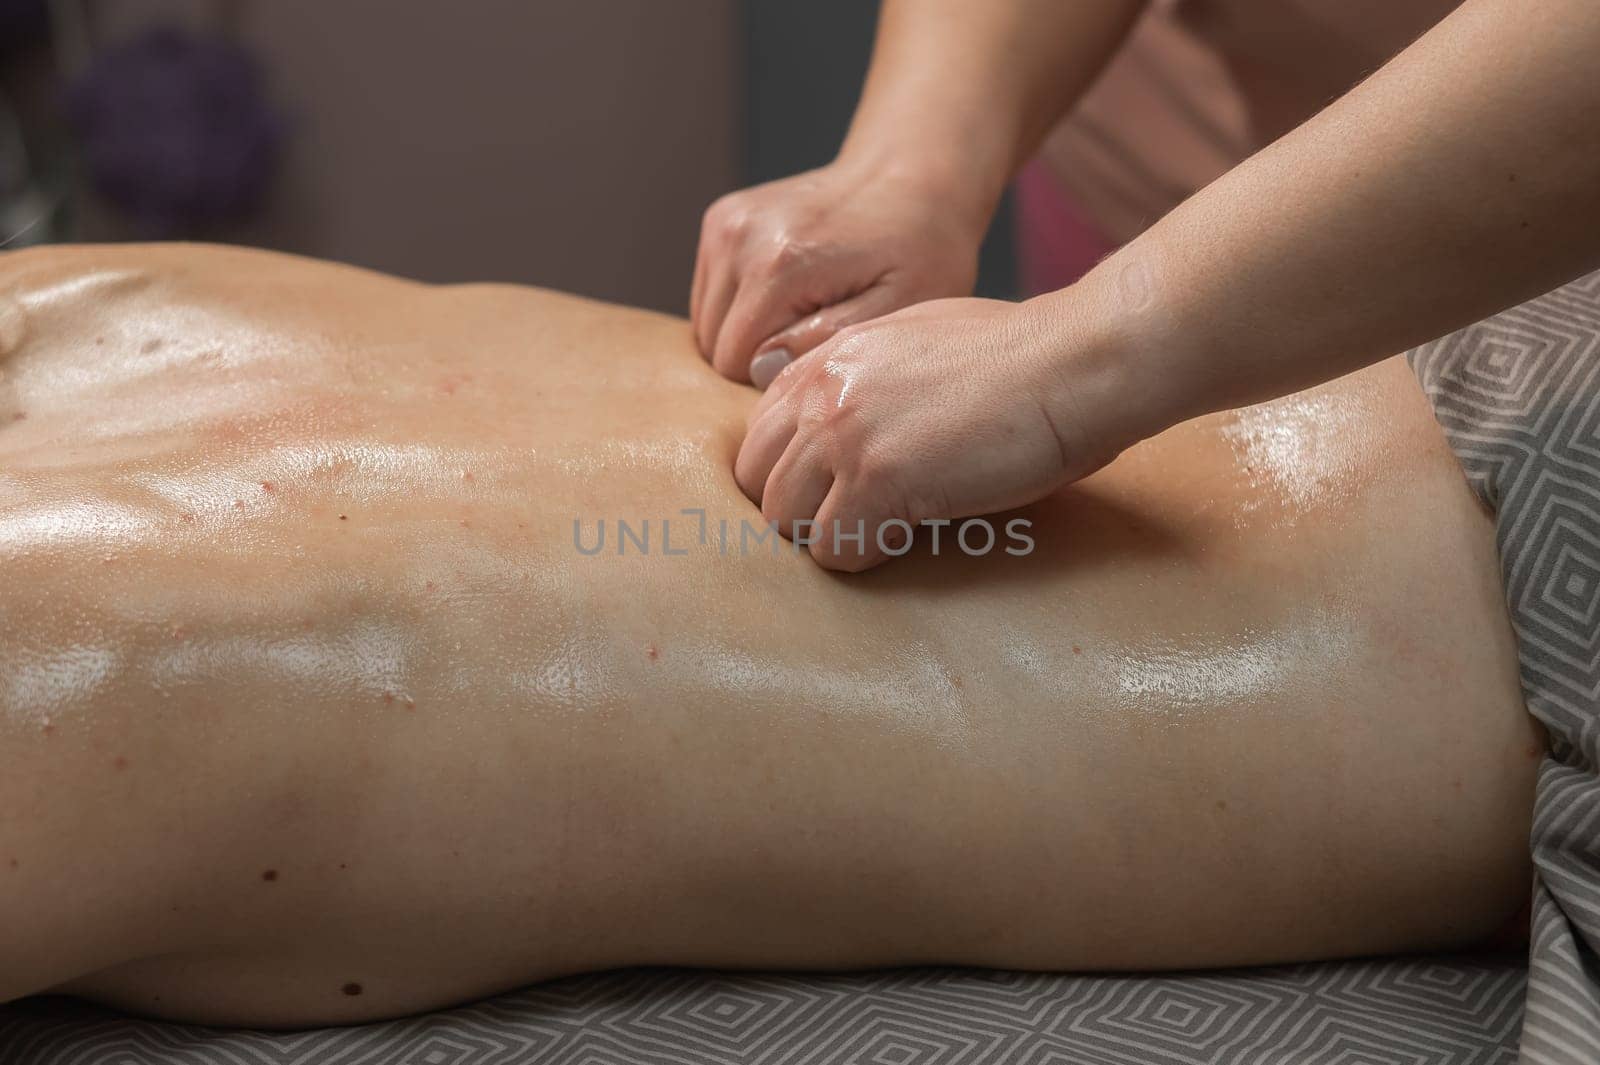 Woman having a therapeutic back massage. by mrwed54